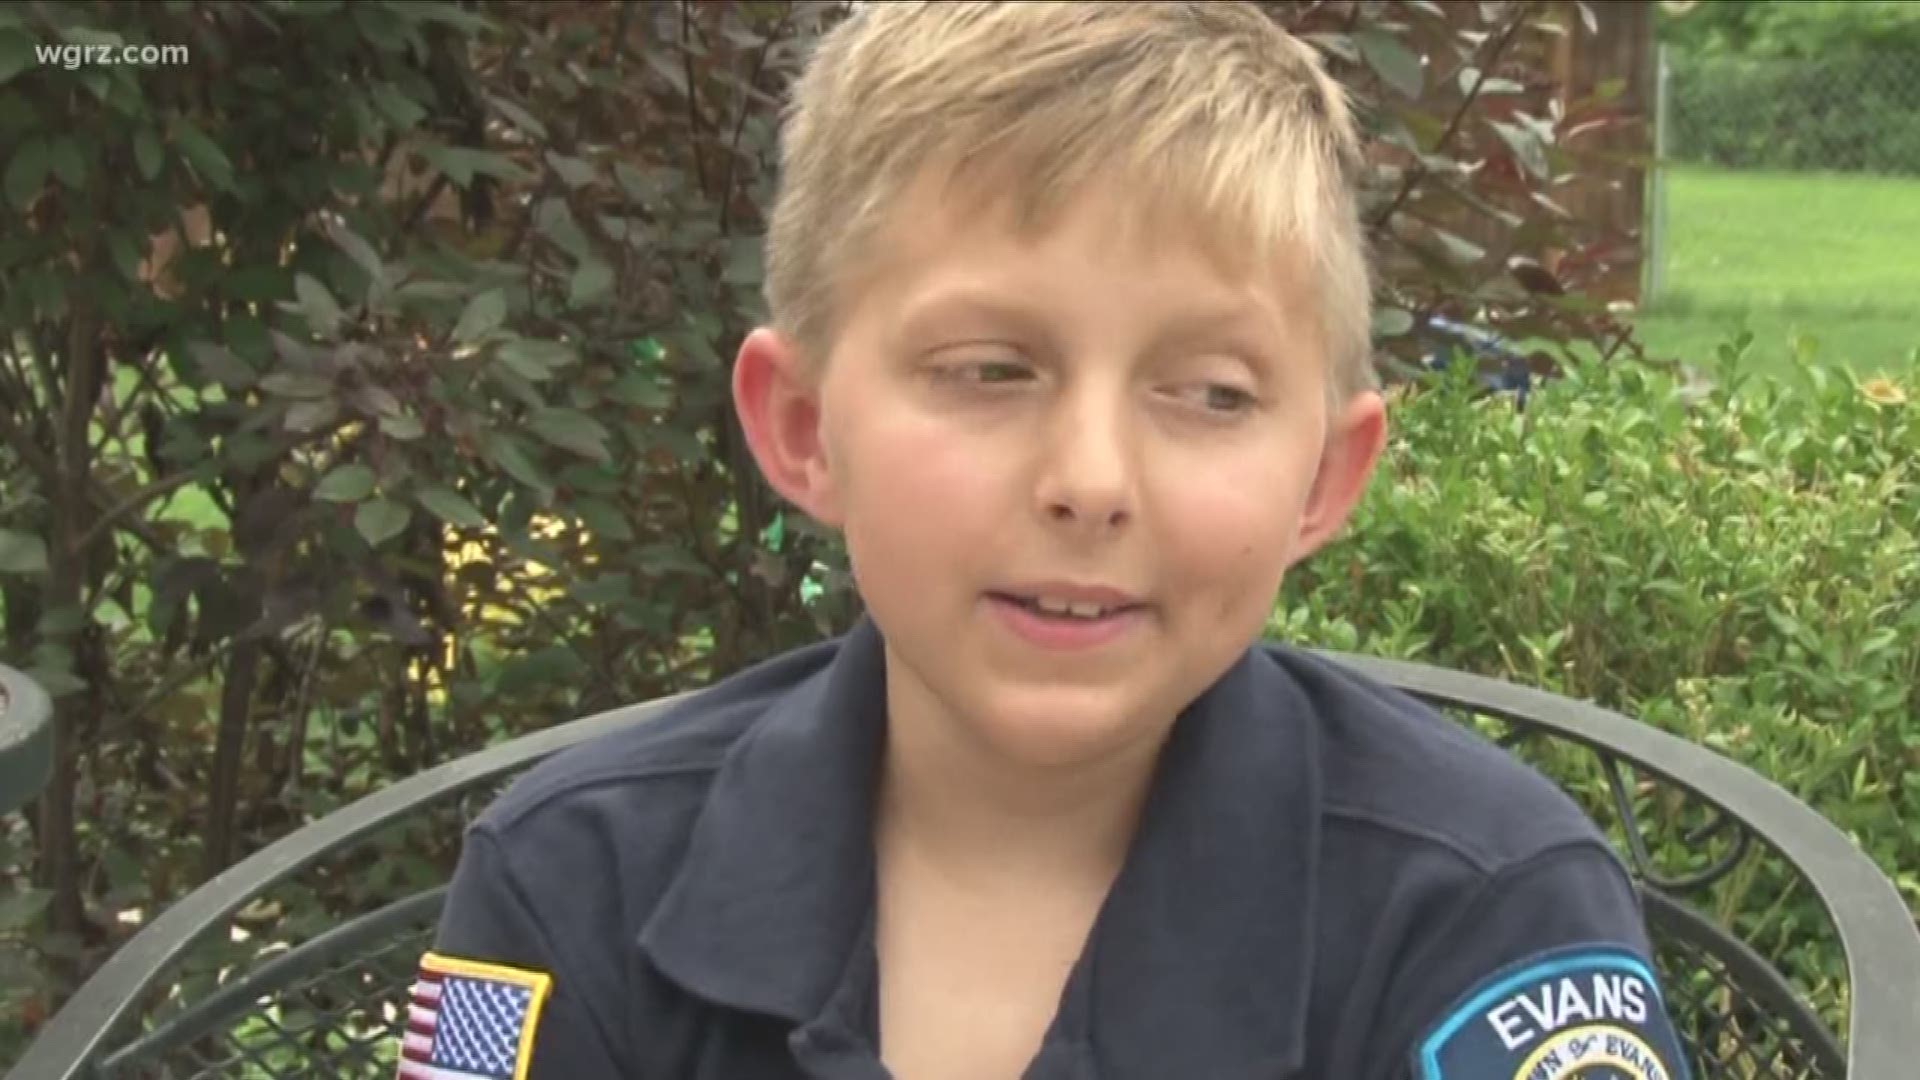 12 Year Old Andrew Masse Passes Away After Battle With Brain Cancer